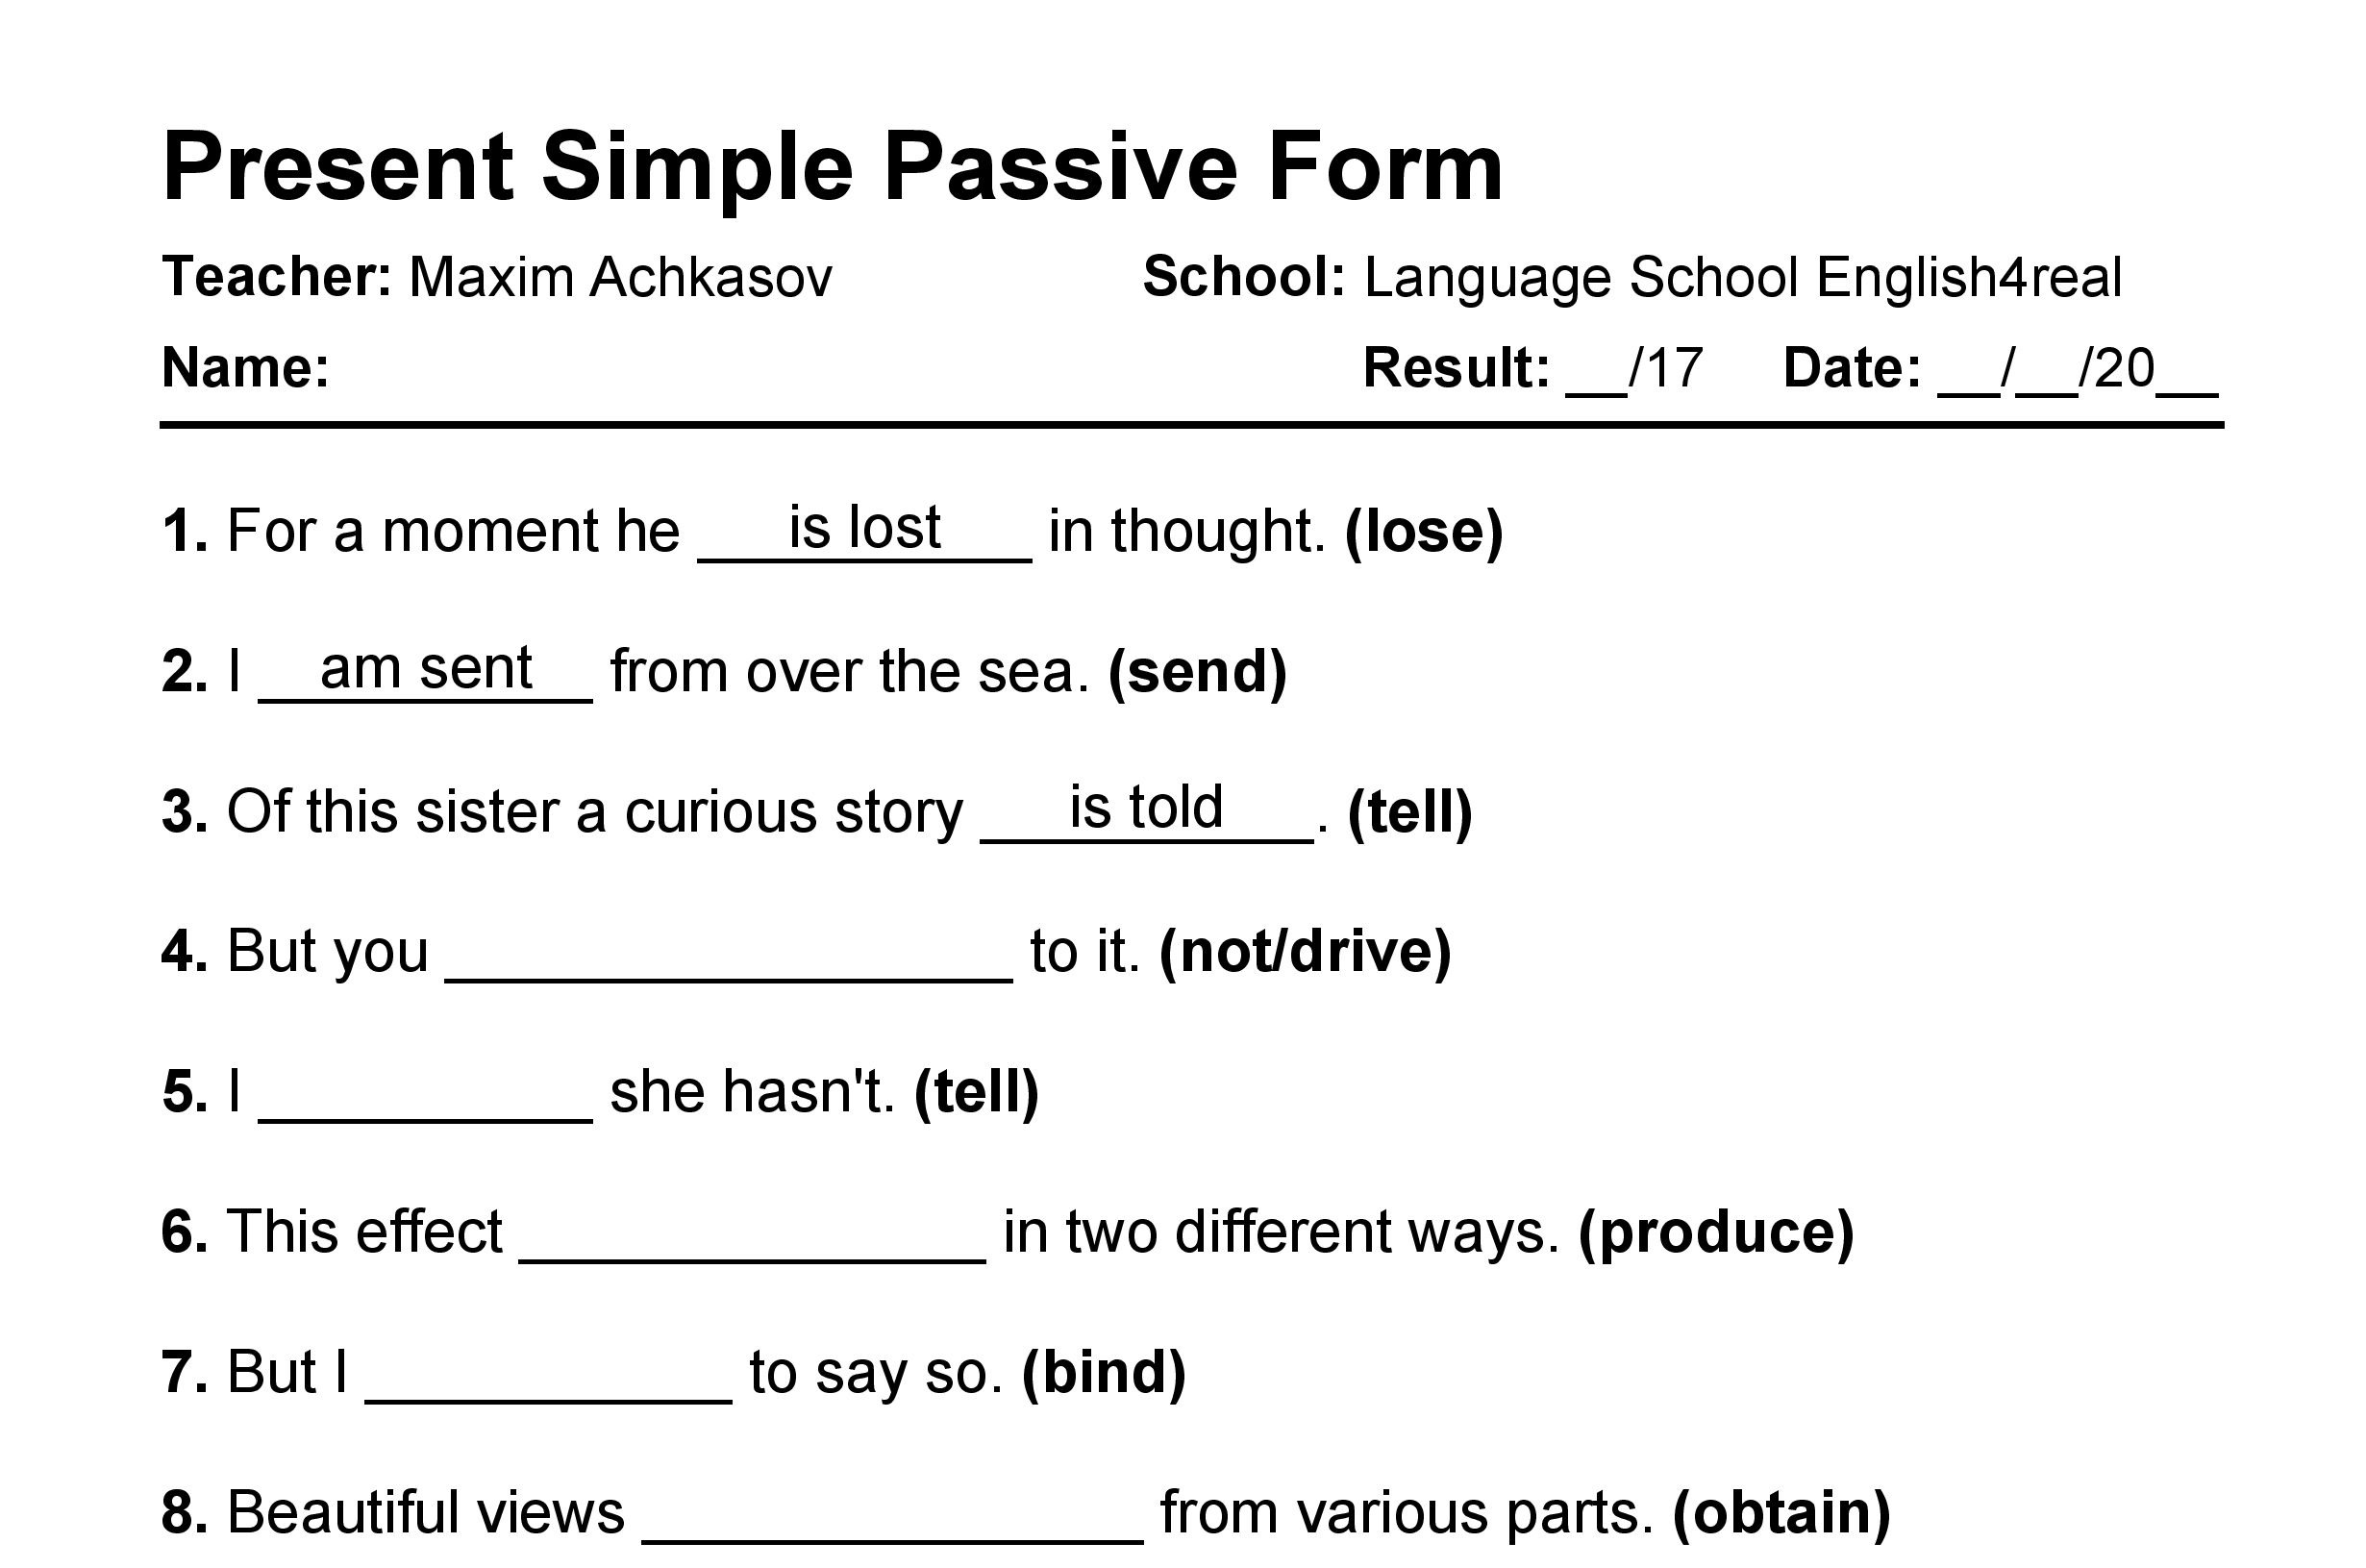 English grammar fill in the blanks exercises with answers in PDF - Present Simple Passive